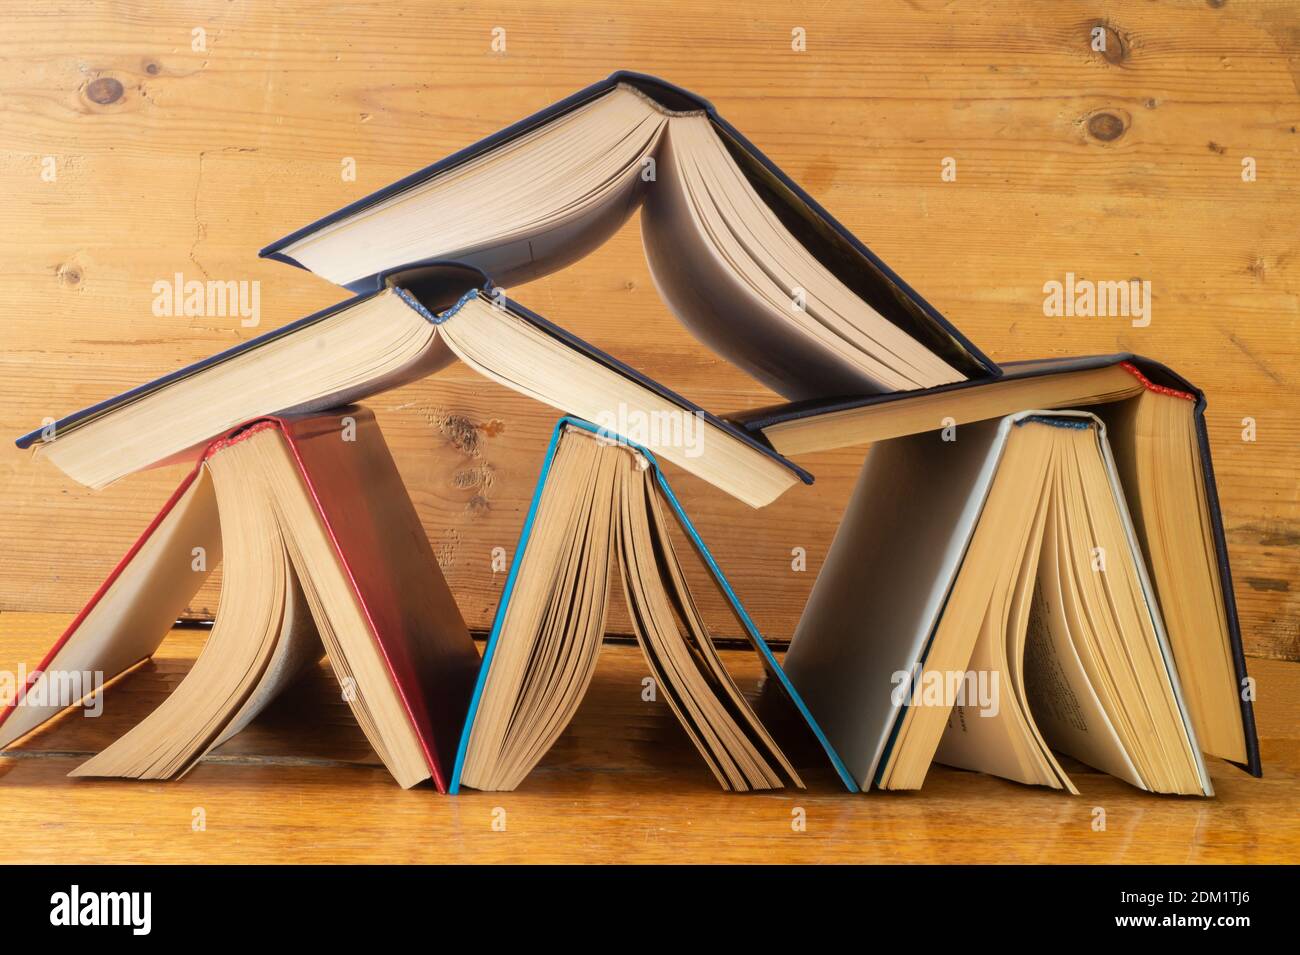 The Stack of the books rests upon wooden regiment. Subjects in closet close-up Stock Photo